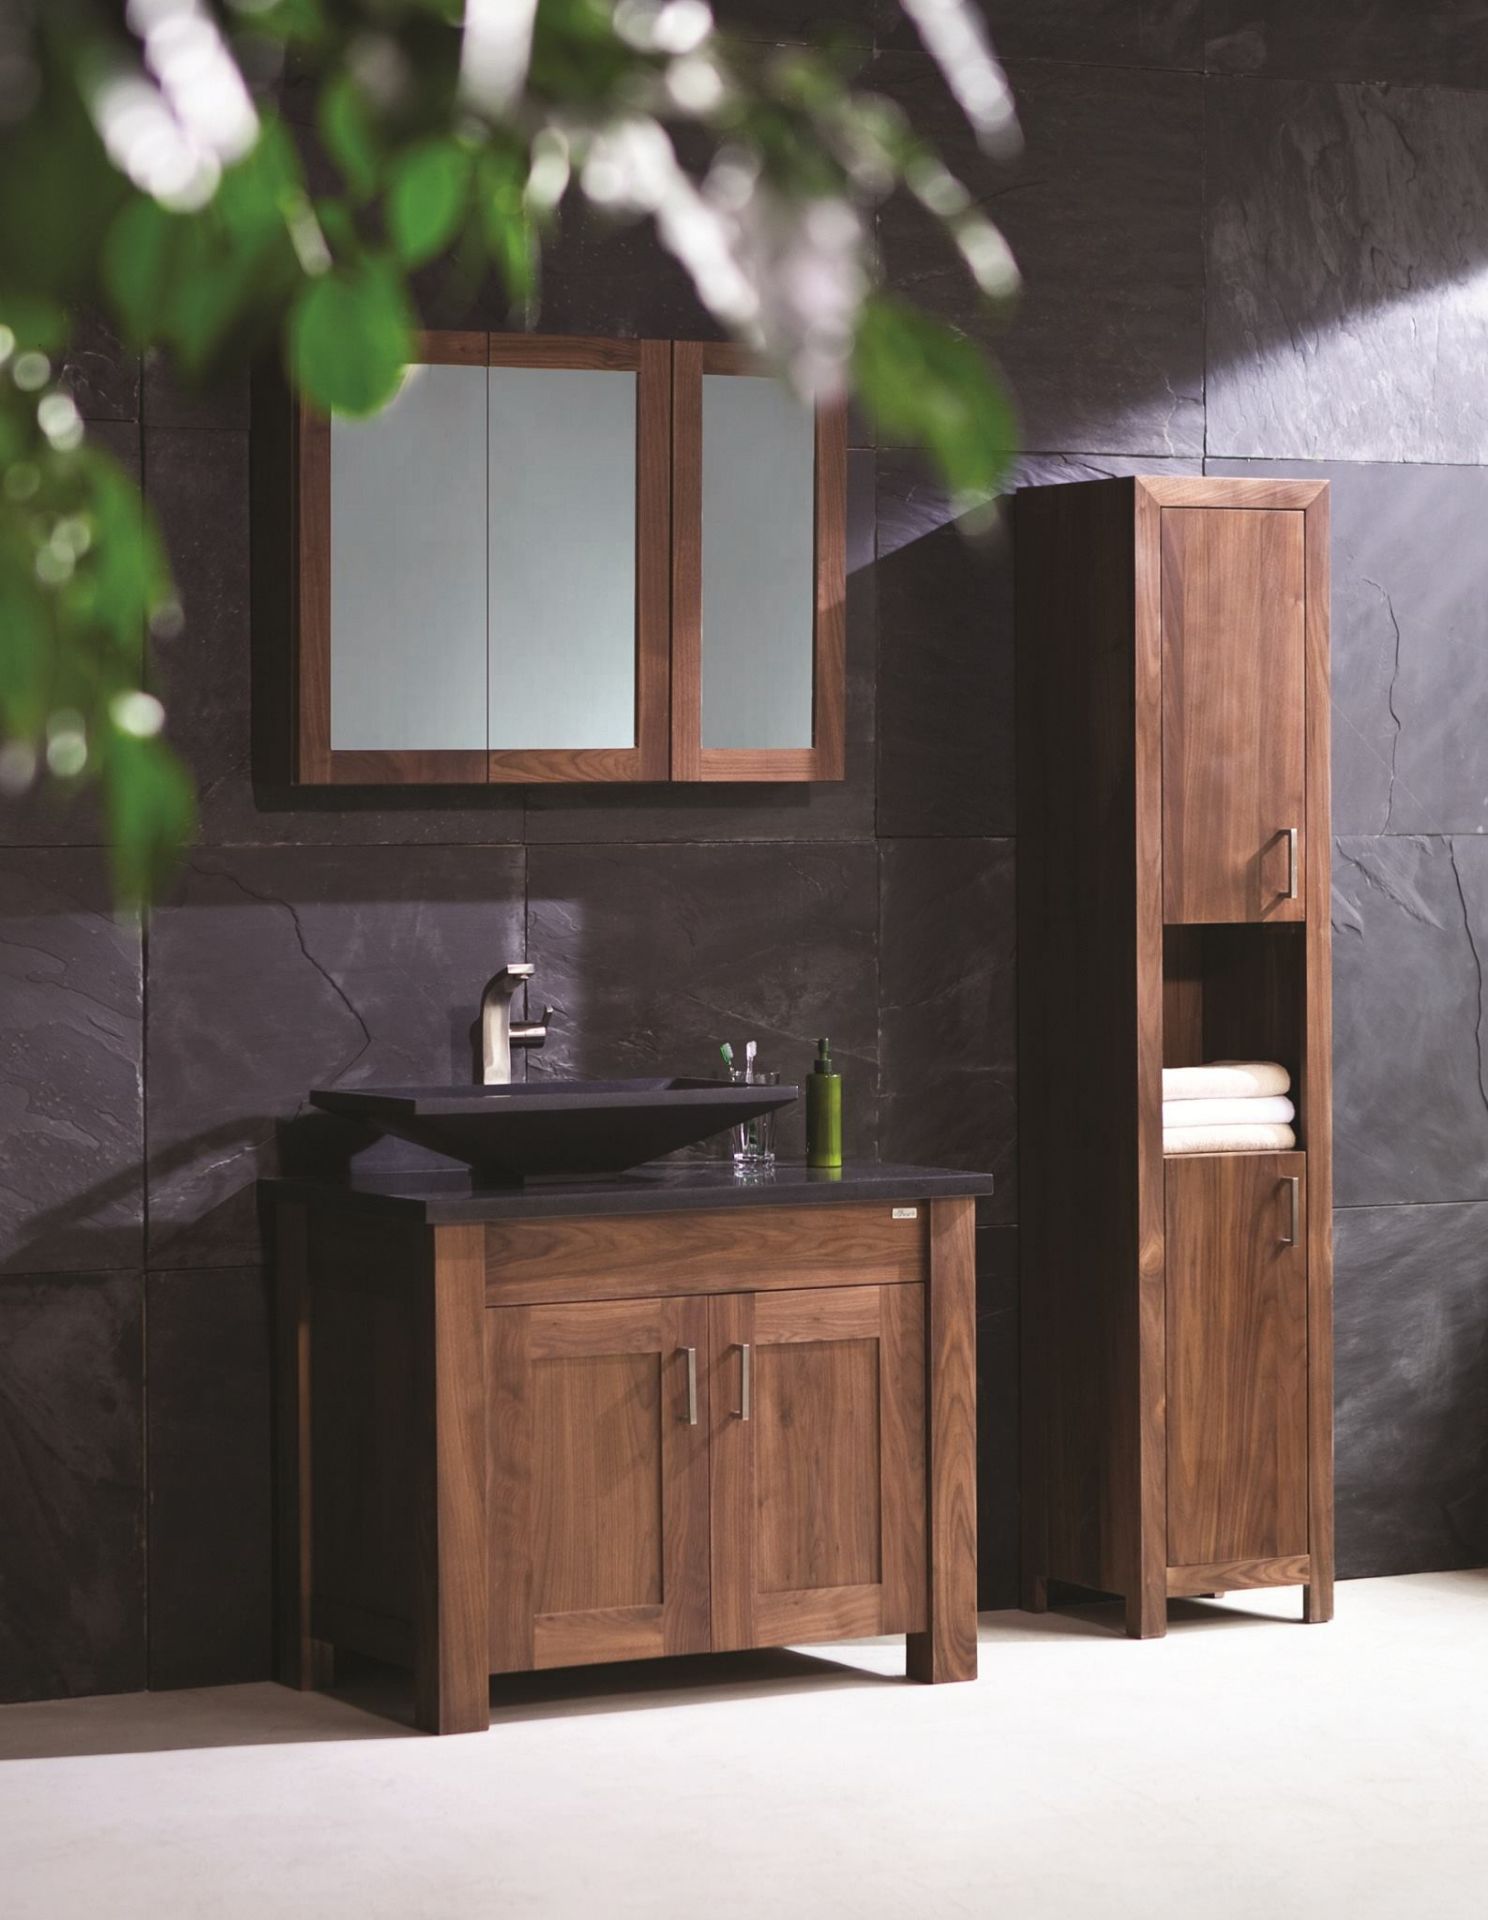 1 x Stonearth 'Finesse' Countertop Washstand - American Solid Walnut - Original RRP £1,400 - Image 8 of 10